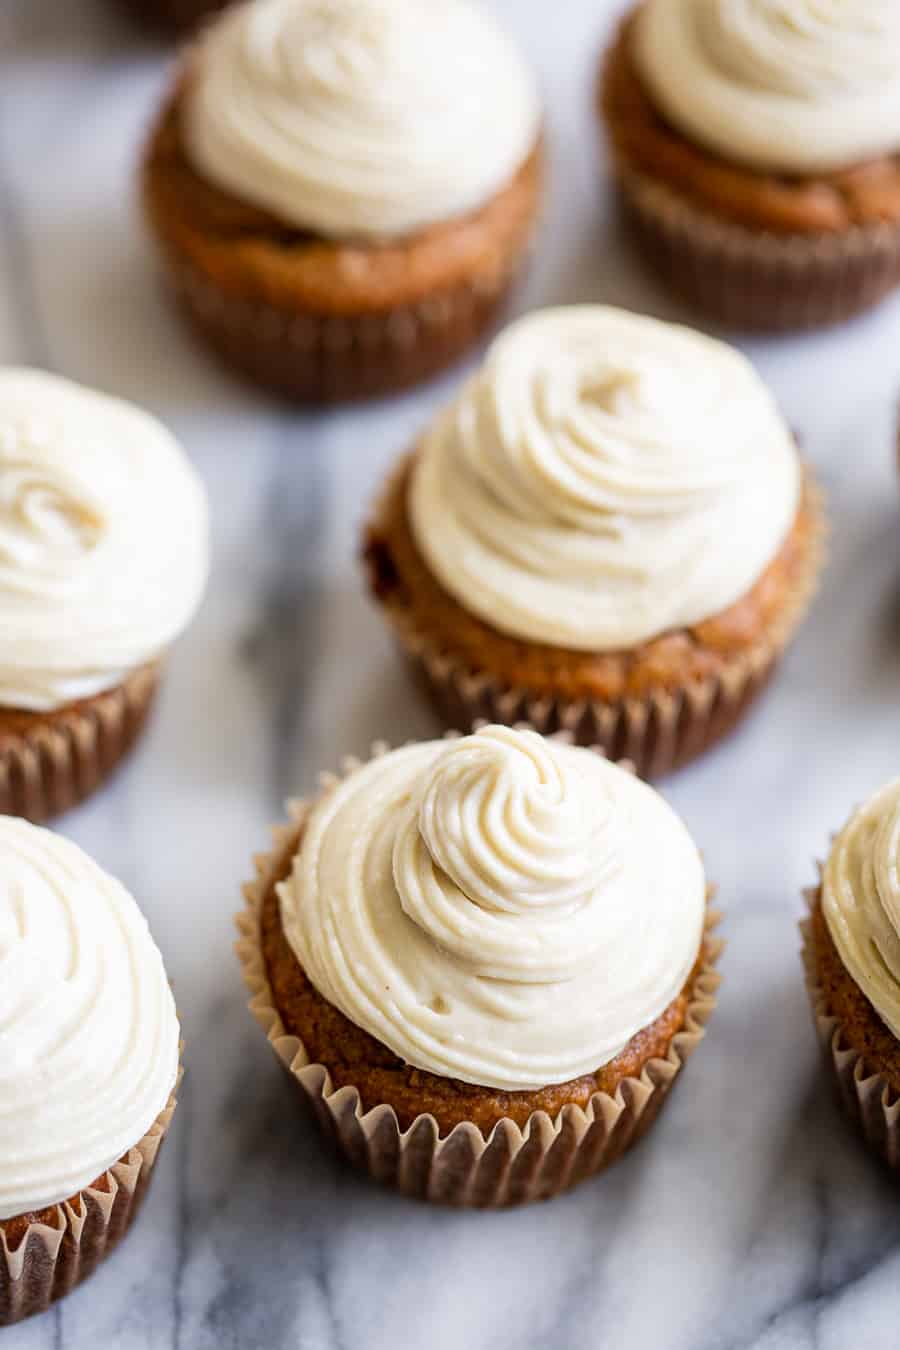 These tender and moist banana cupcakes are topped with the perfect cashew cream cheese frosting that you won’t believe is dairy-free! These crowd pleasing paleo cupcakes are perfect for kids, gluten free and dairy free. #paleo #glutenfree #cleaneating #dairyfree #paleobaking #paleocake